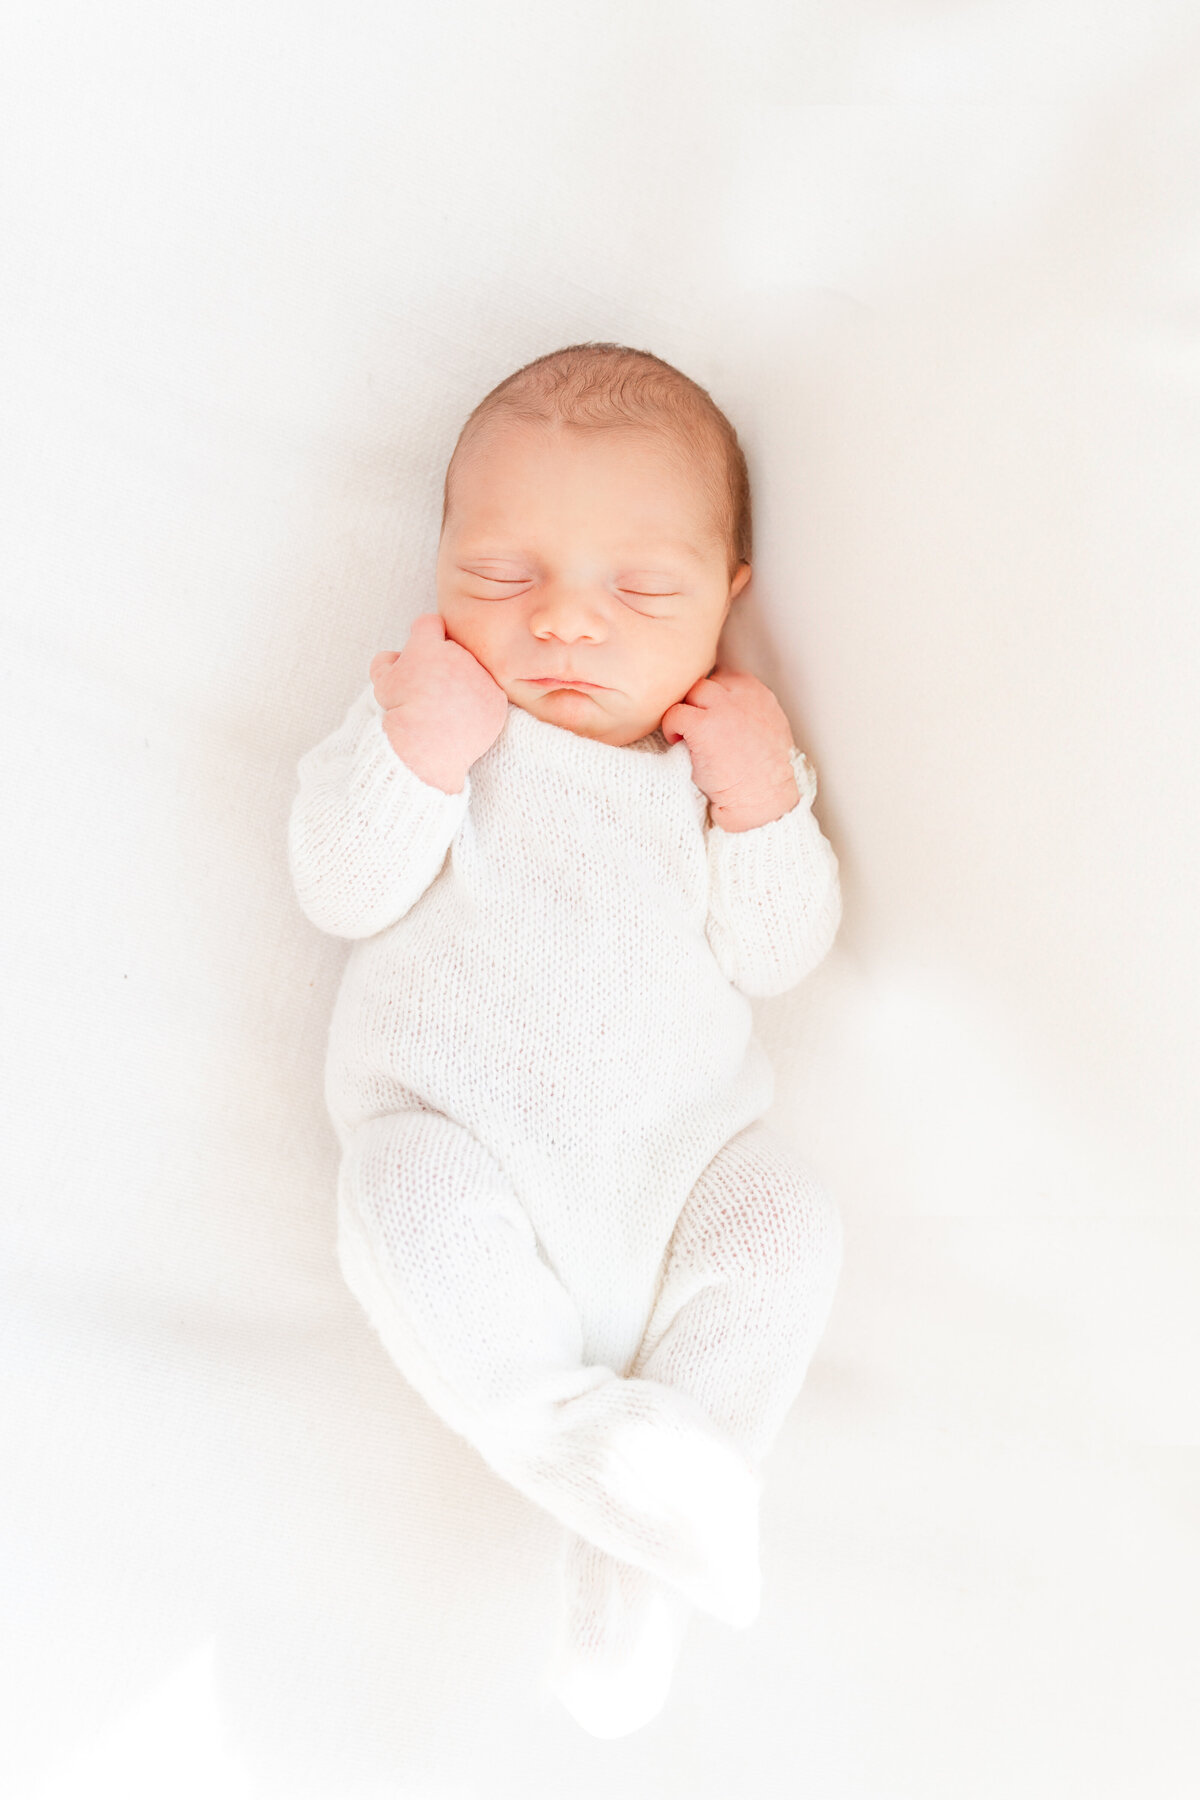 Chattanooga newborn photography infant solo